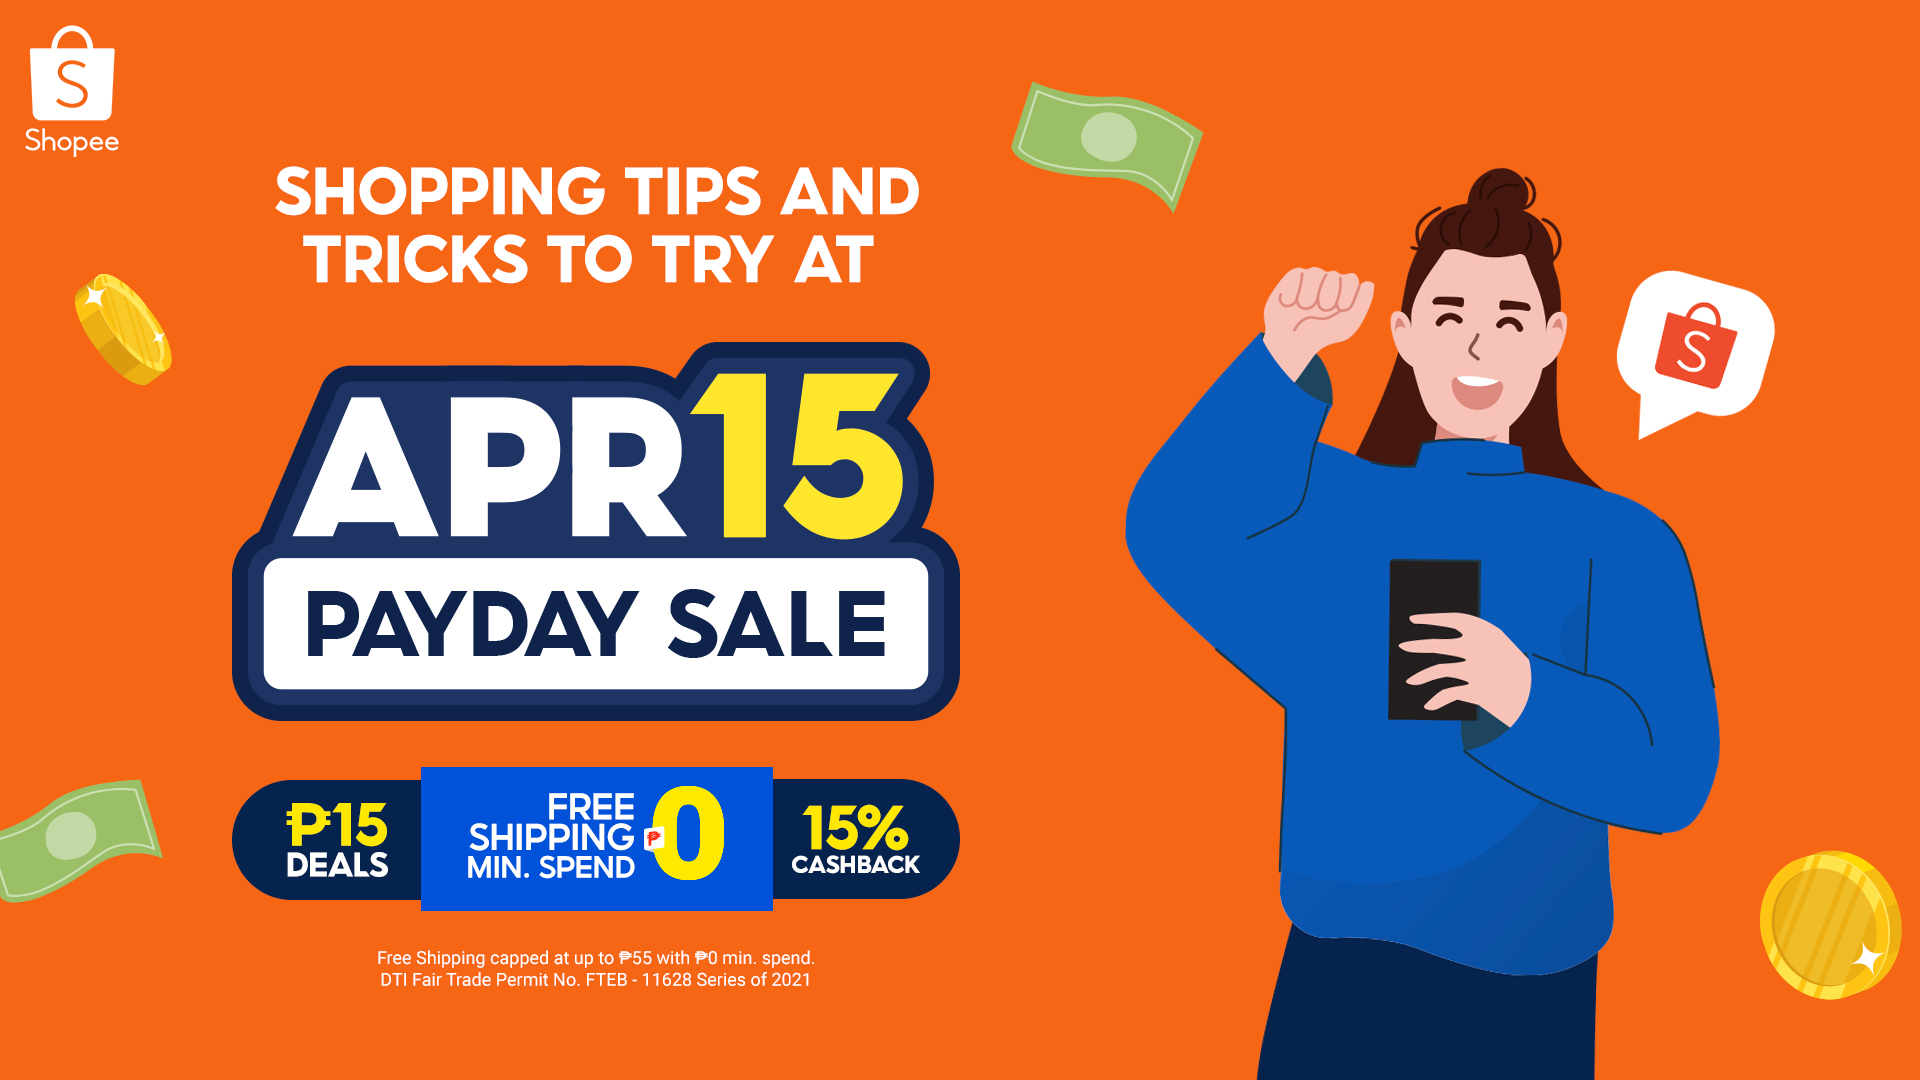 4-15-payday-sale-shopee